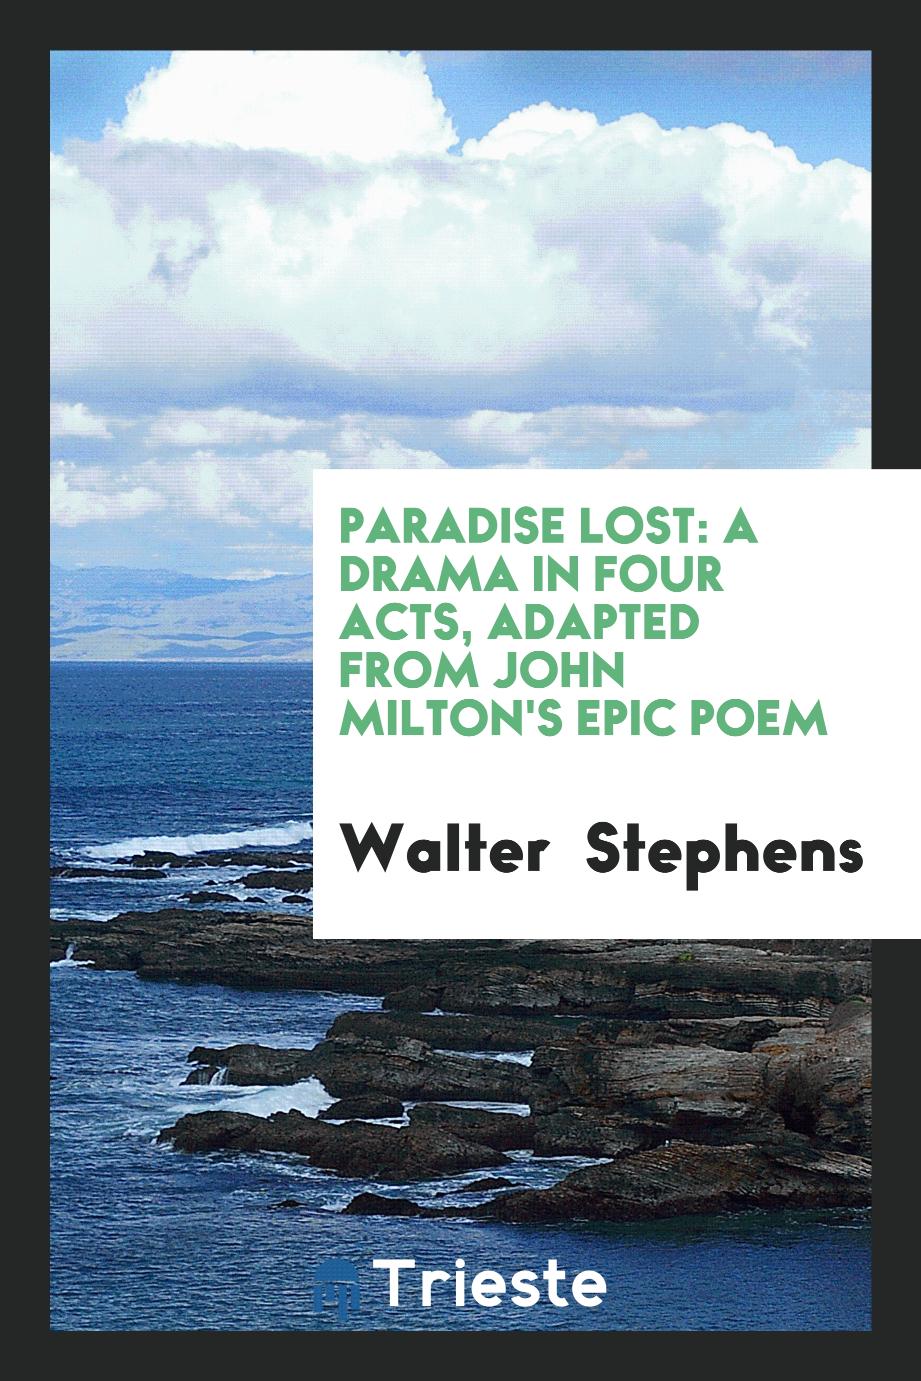 Paradise lost: a drama in four acts, adapted from John Milton's epic poem